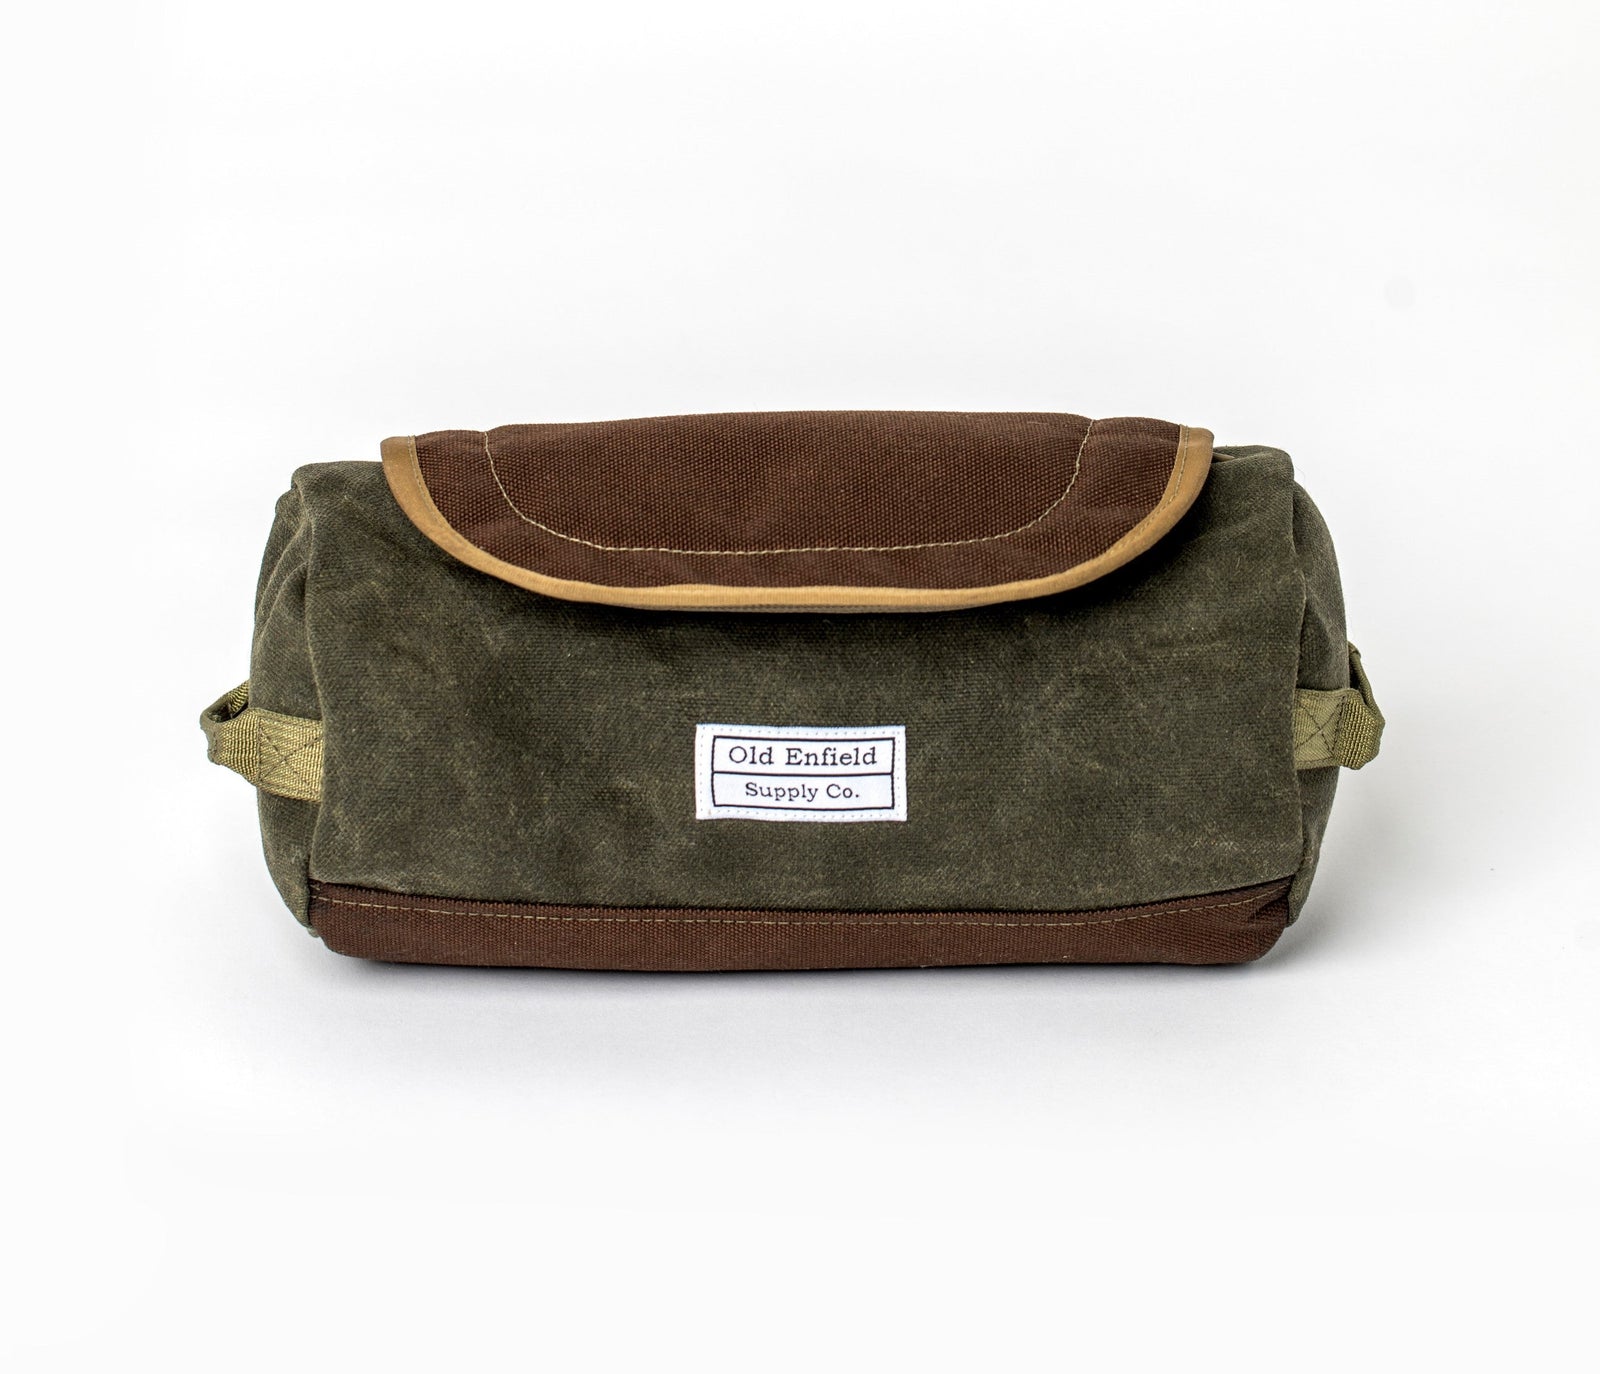 Heritage Dopp Kit  Wax Canvas Toiletry Bag, Vintage Travel Dopp Kit Tagged  waxed canvas - Old Enfield Supply